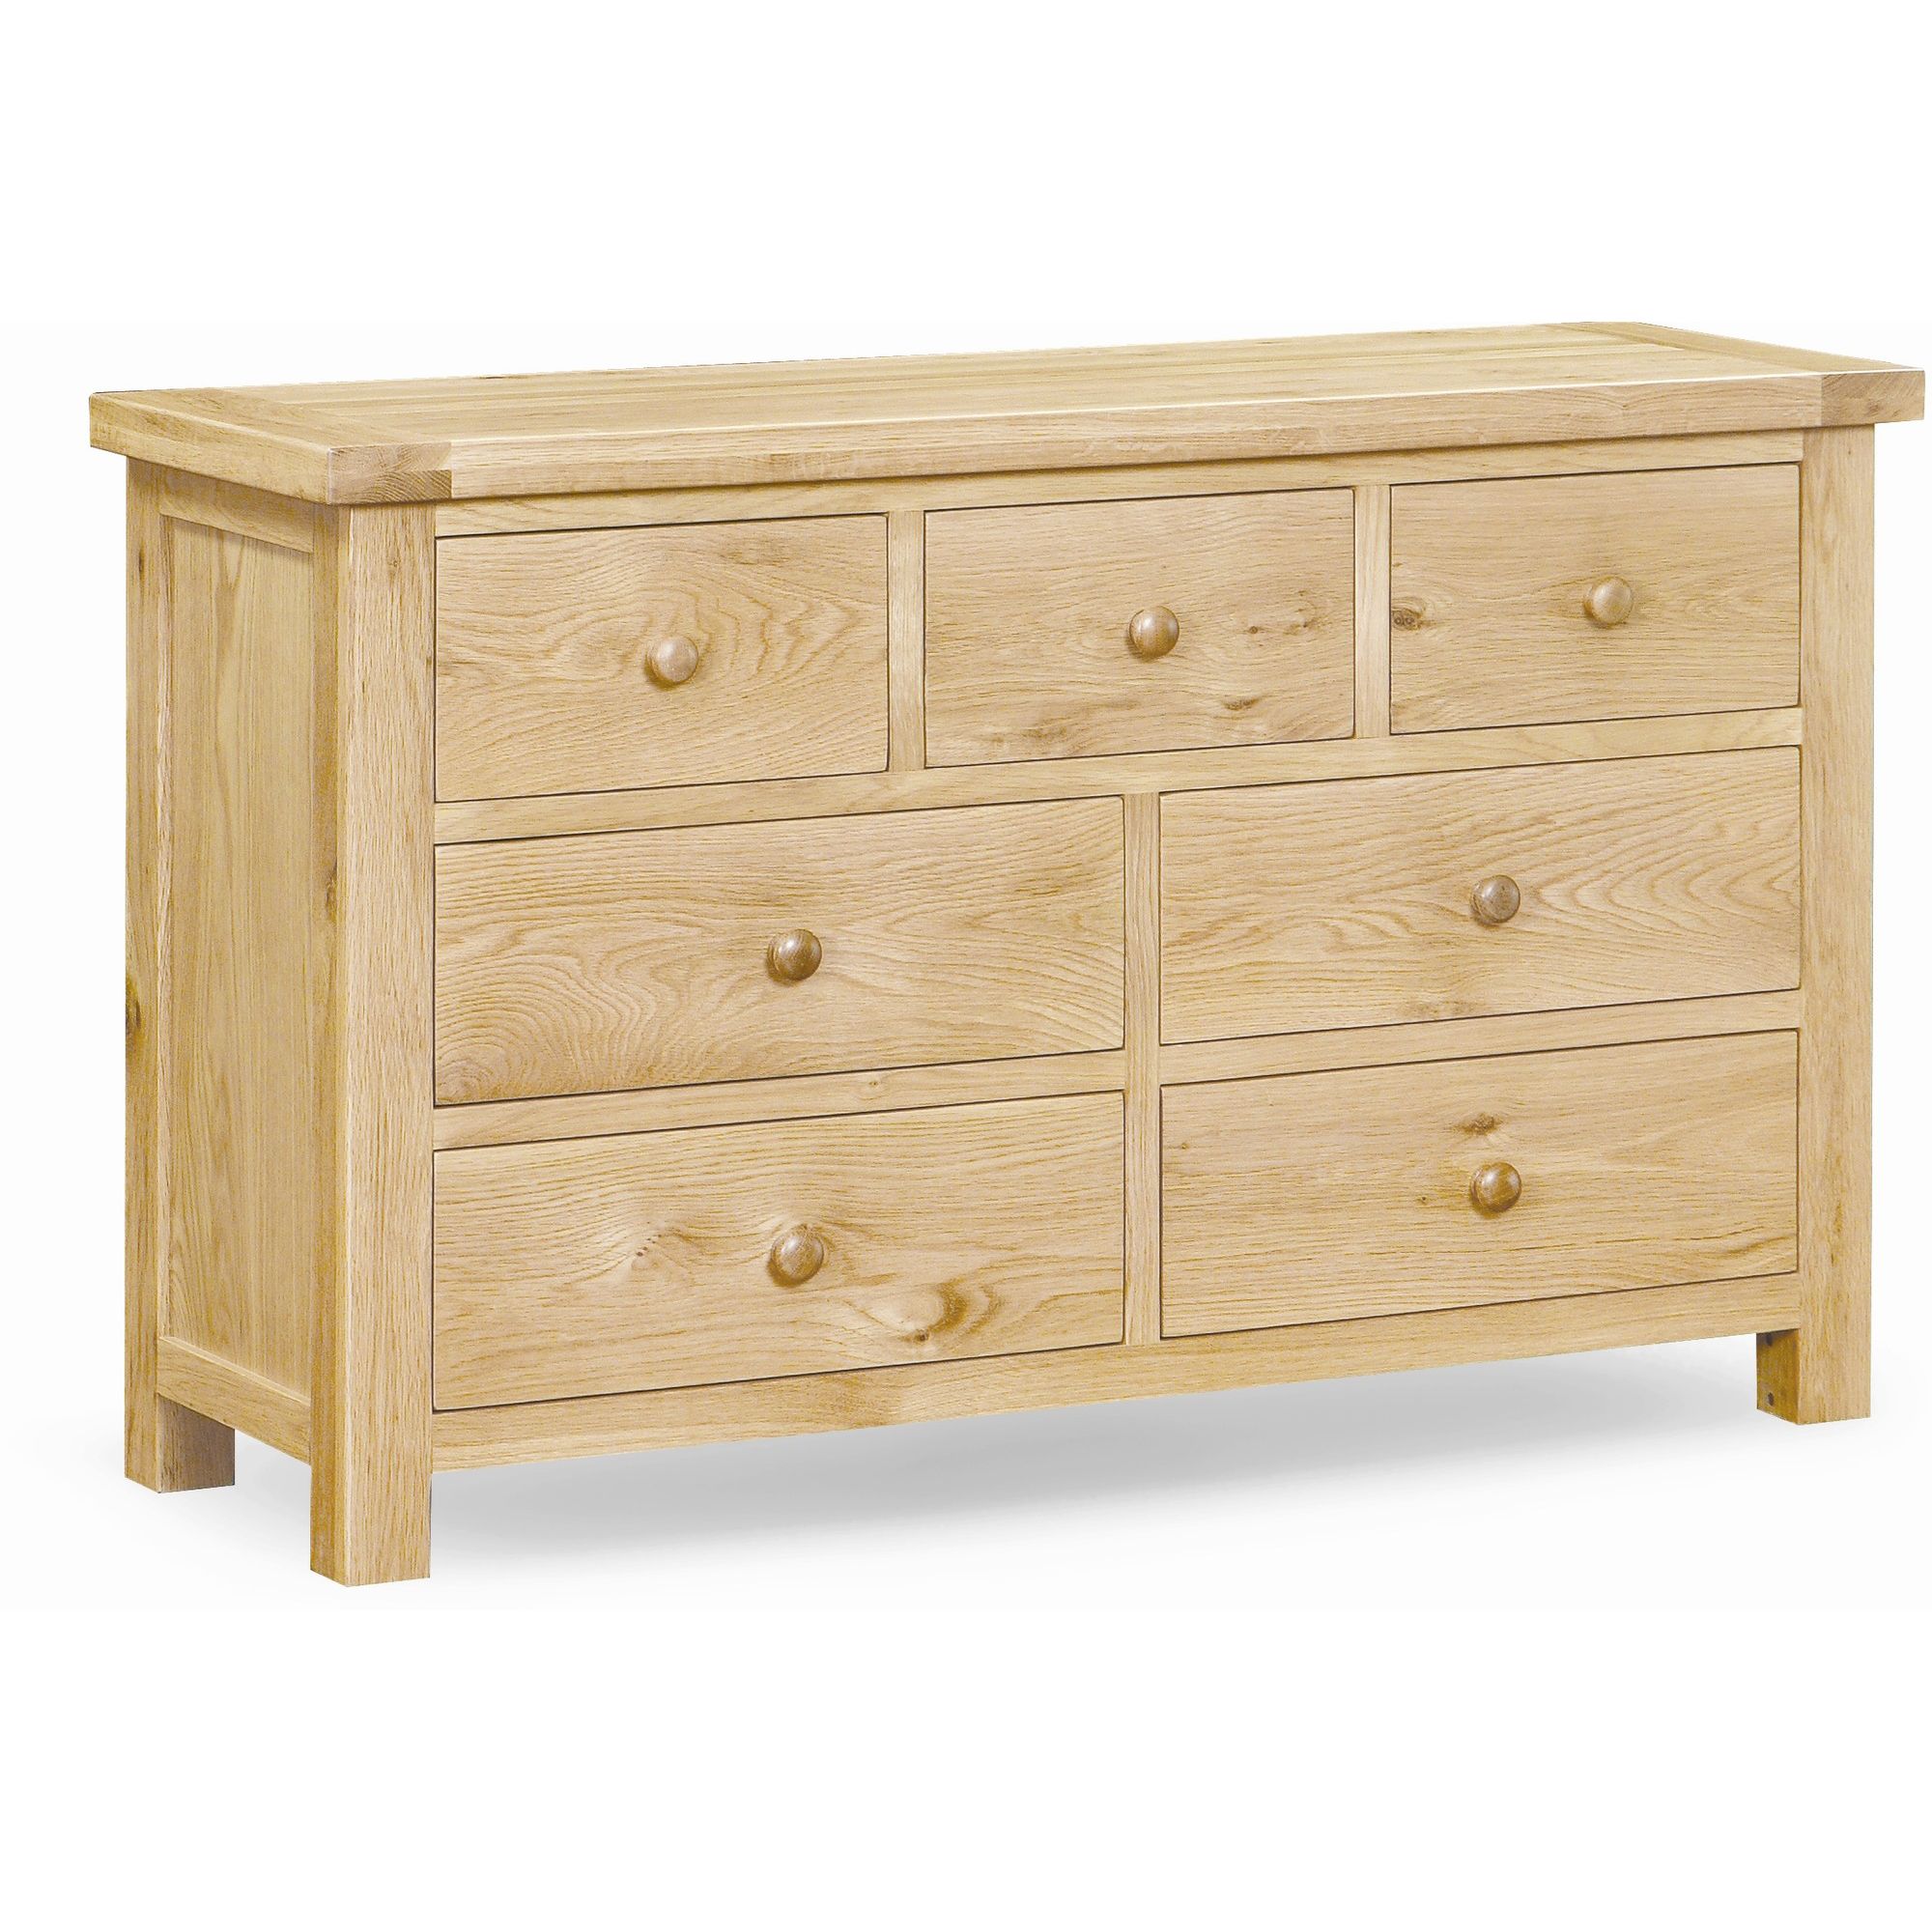 Alterton Furniture Chatsworth 3 Over 4 Drawer Chest at Tesco Direct